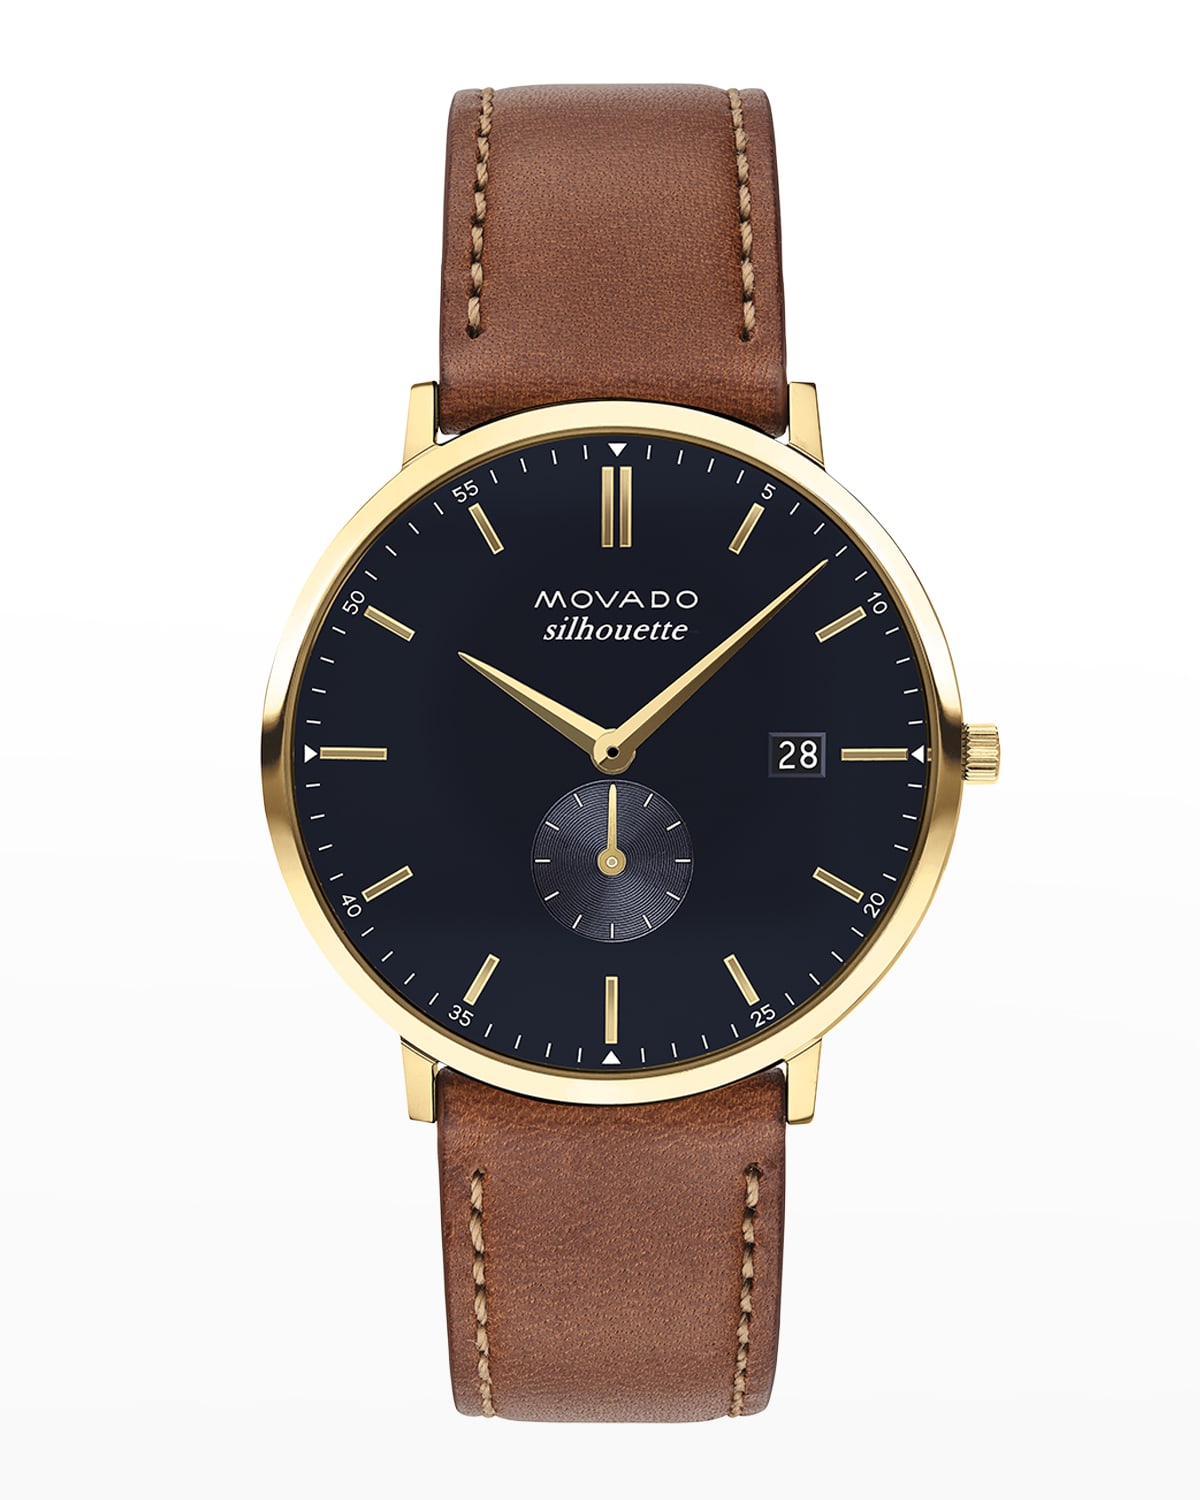 MOVADO MEN'S HERITAGE IP YELLOW GOLD LEATHER WATCH, 40MM